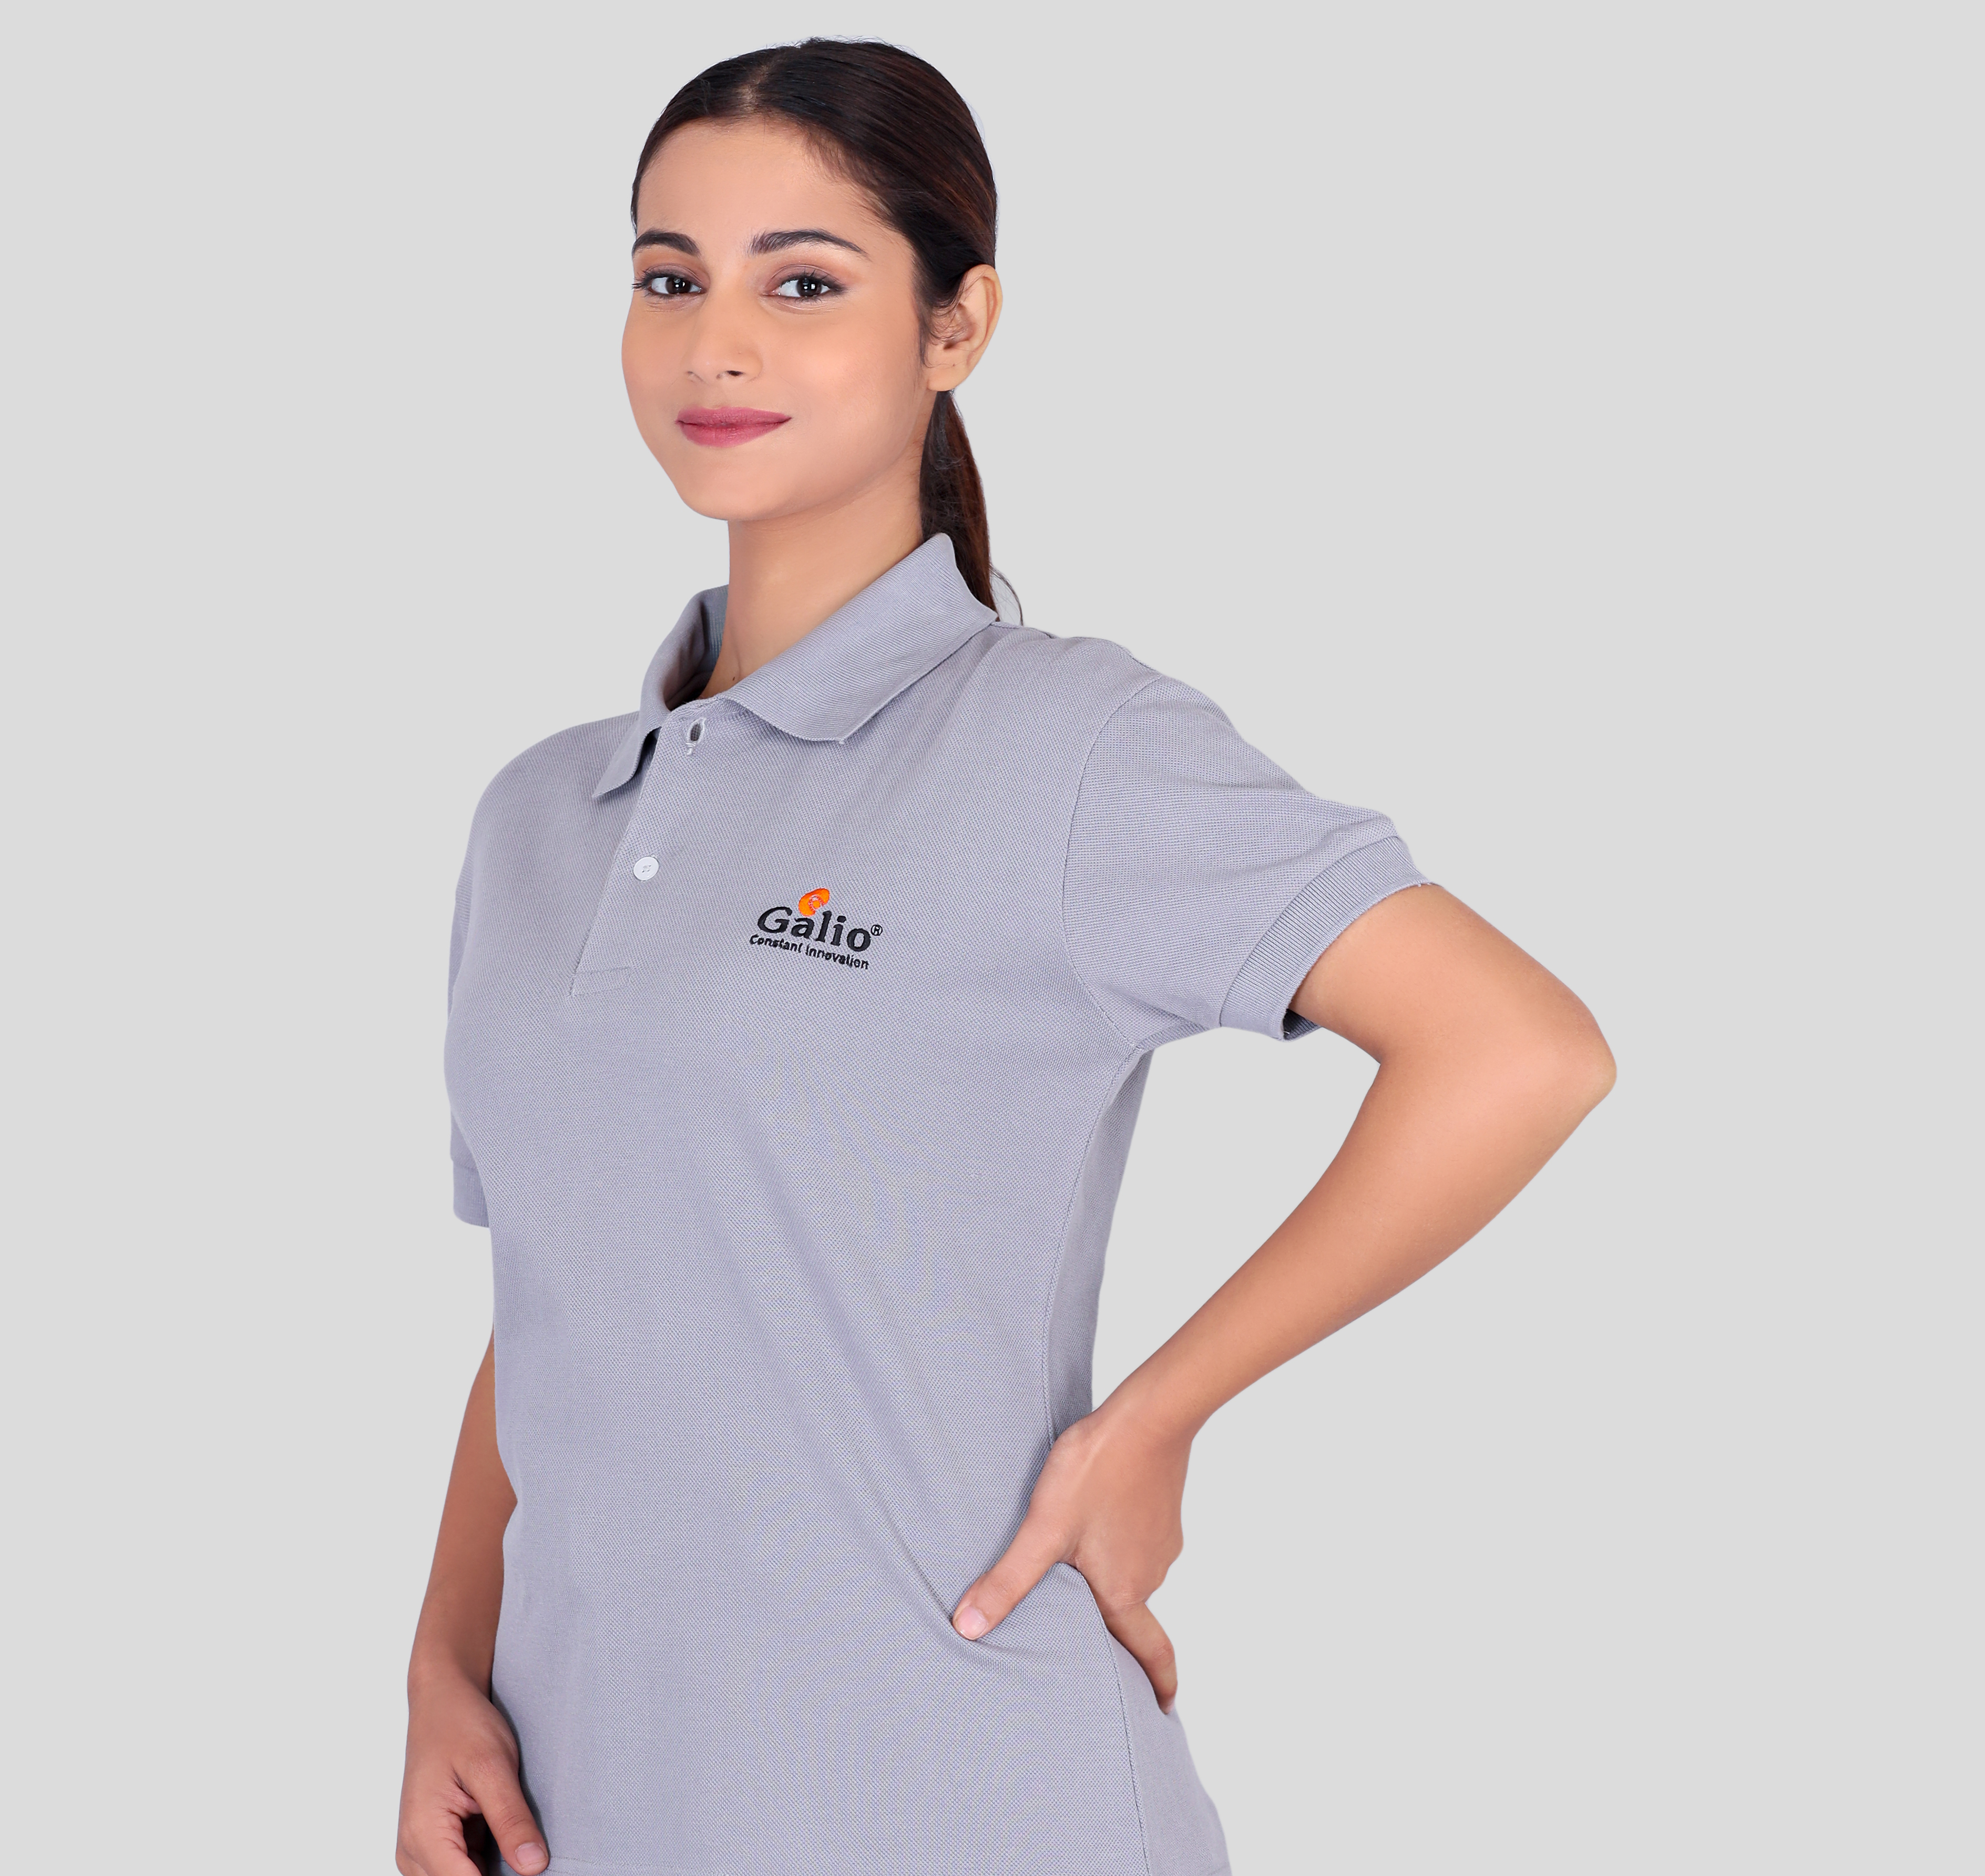 Galio solid grey promotional polo t-shirts supplier 